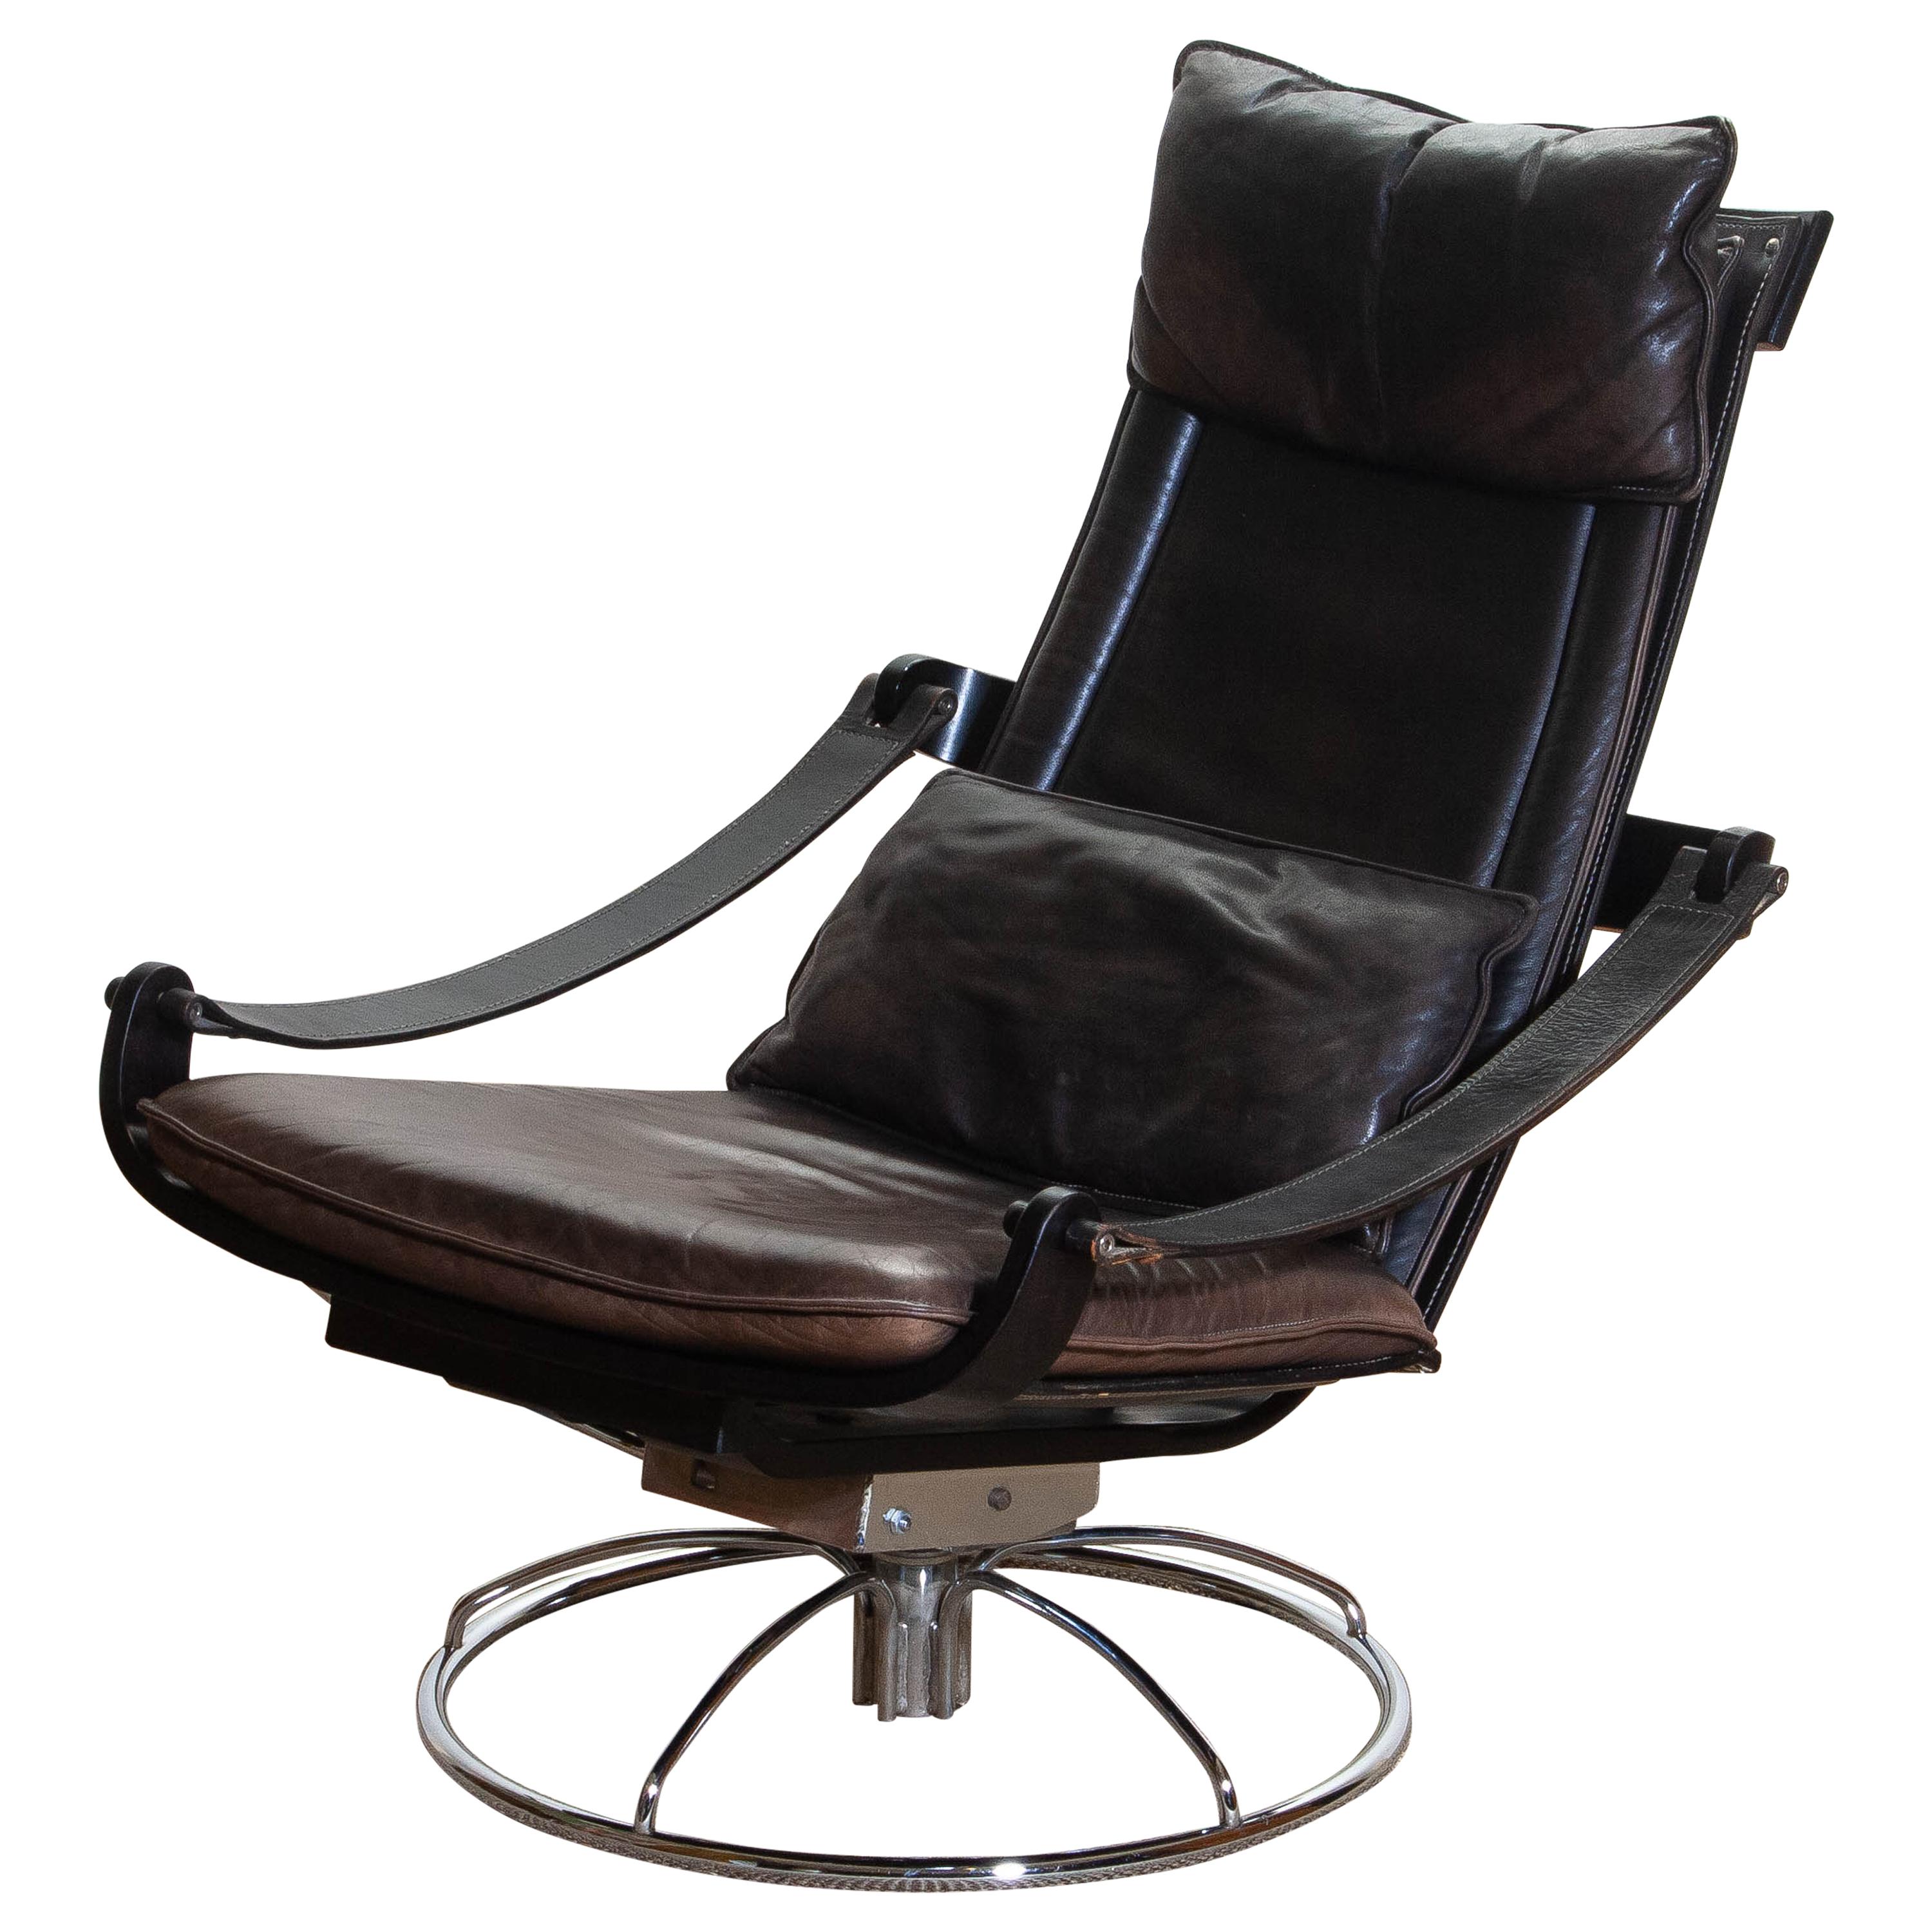 Extremely beautiful and artistic swivel and relaxing easy / lounge chair designed by Åke Fribytter for Nelo, Sweden.
This high quality chair features a plywood frame and brown leather cushions and a chromed metal base.
The armrests are made of